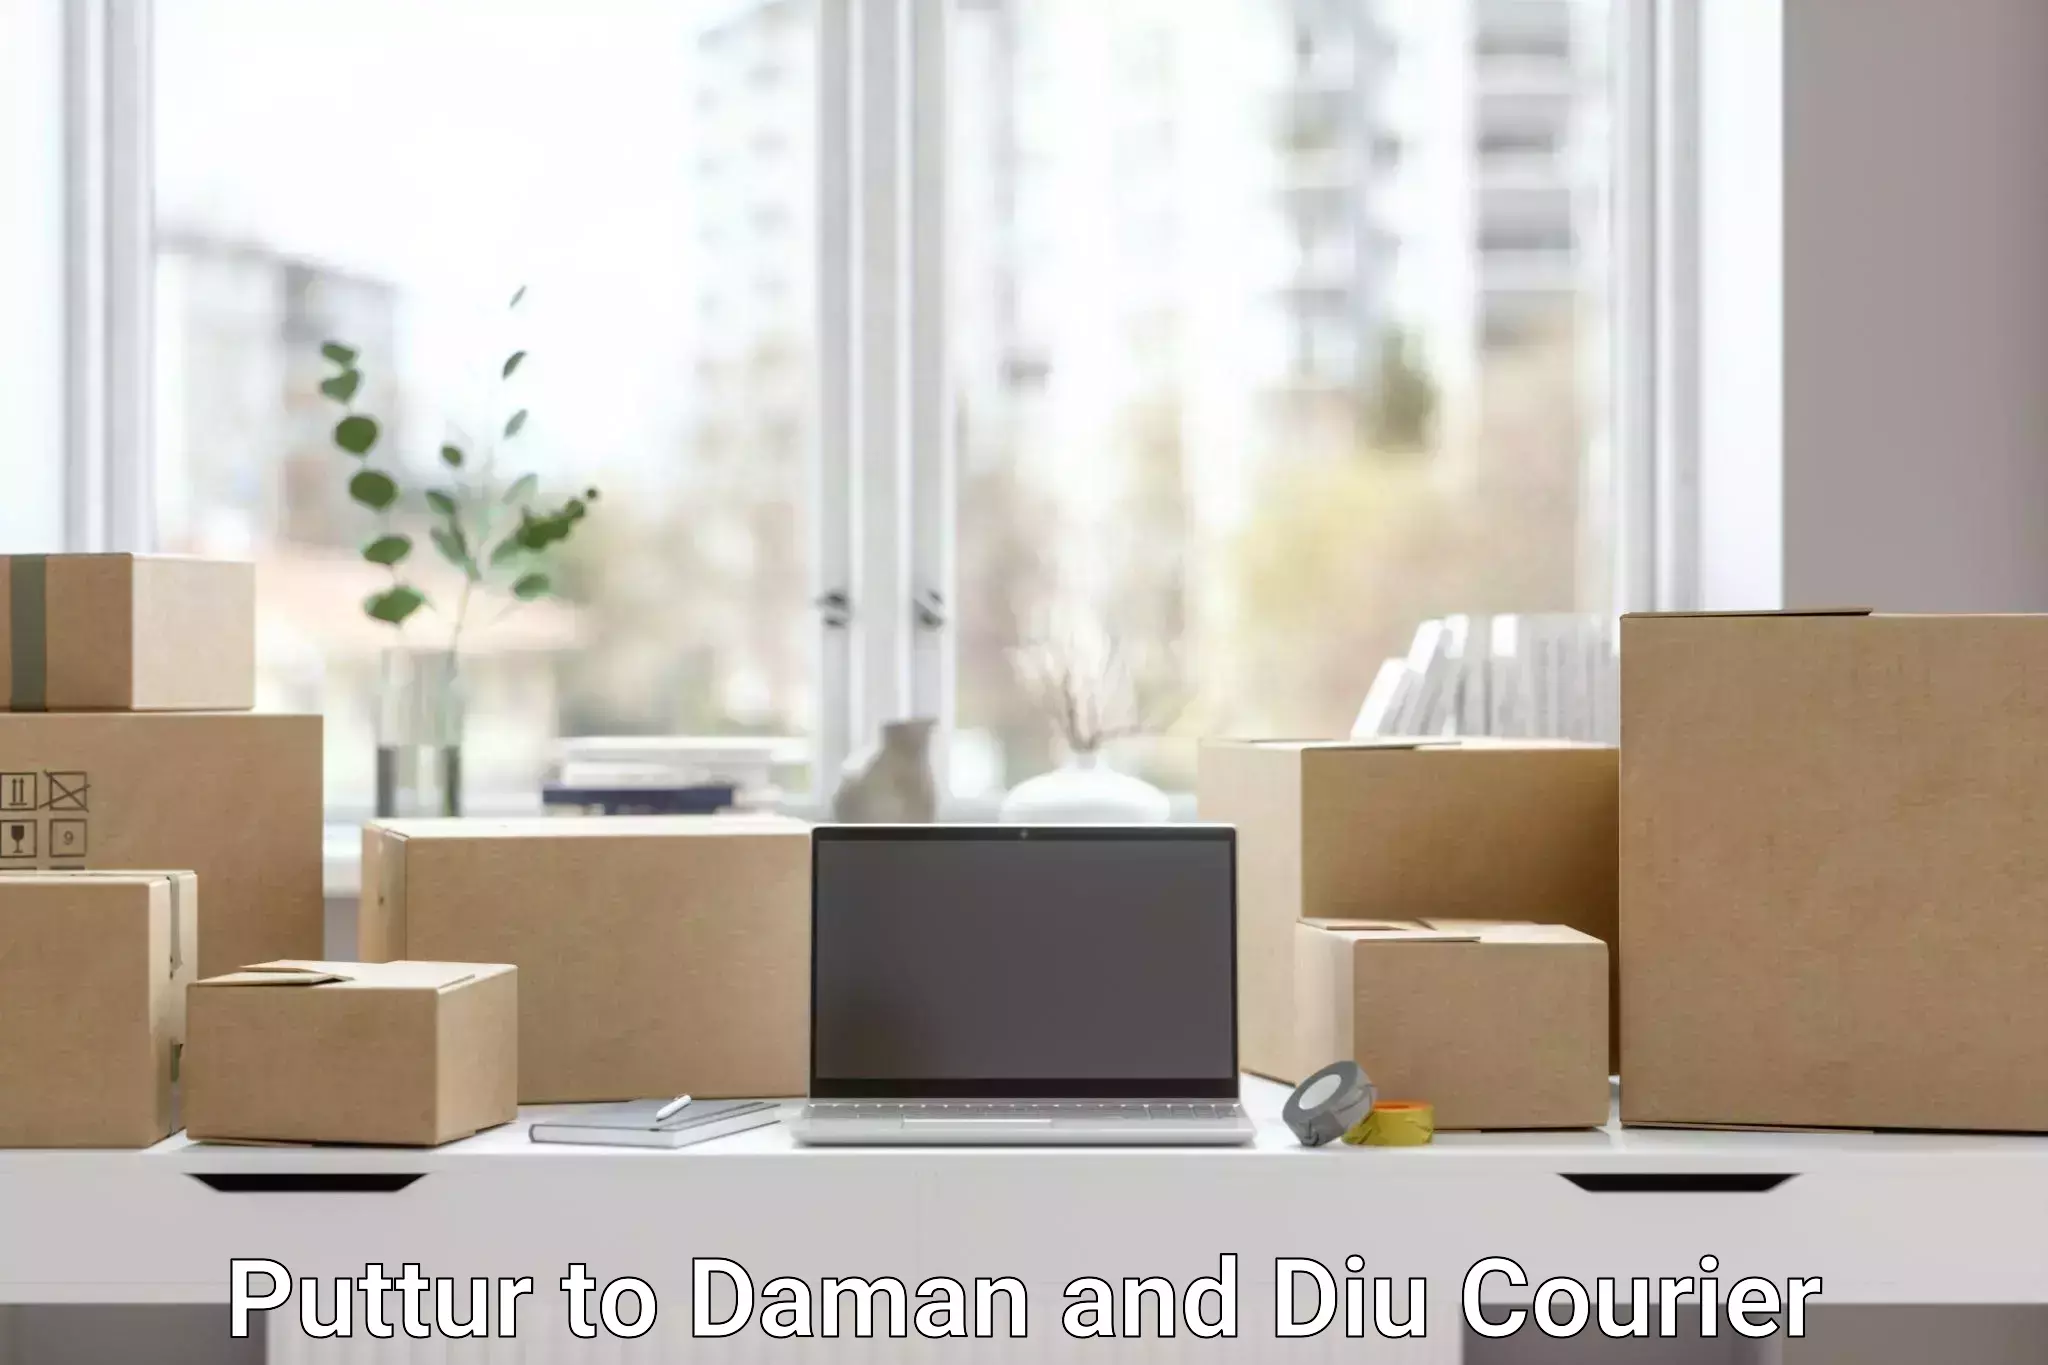 Premium courier solutions Puttur to Daman and Diu